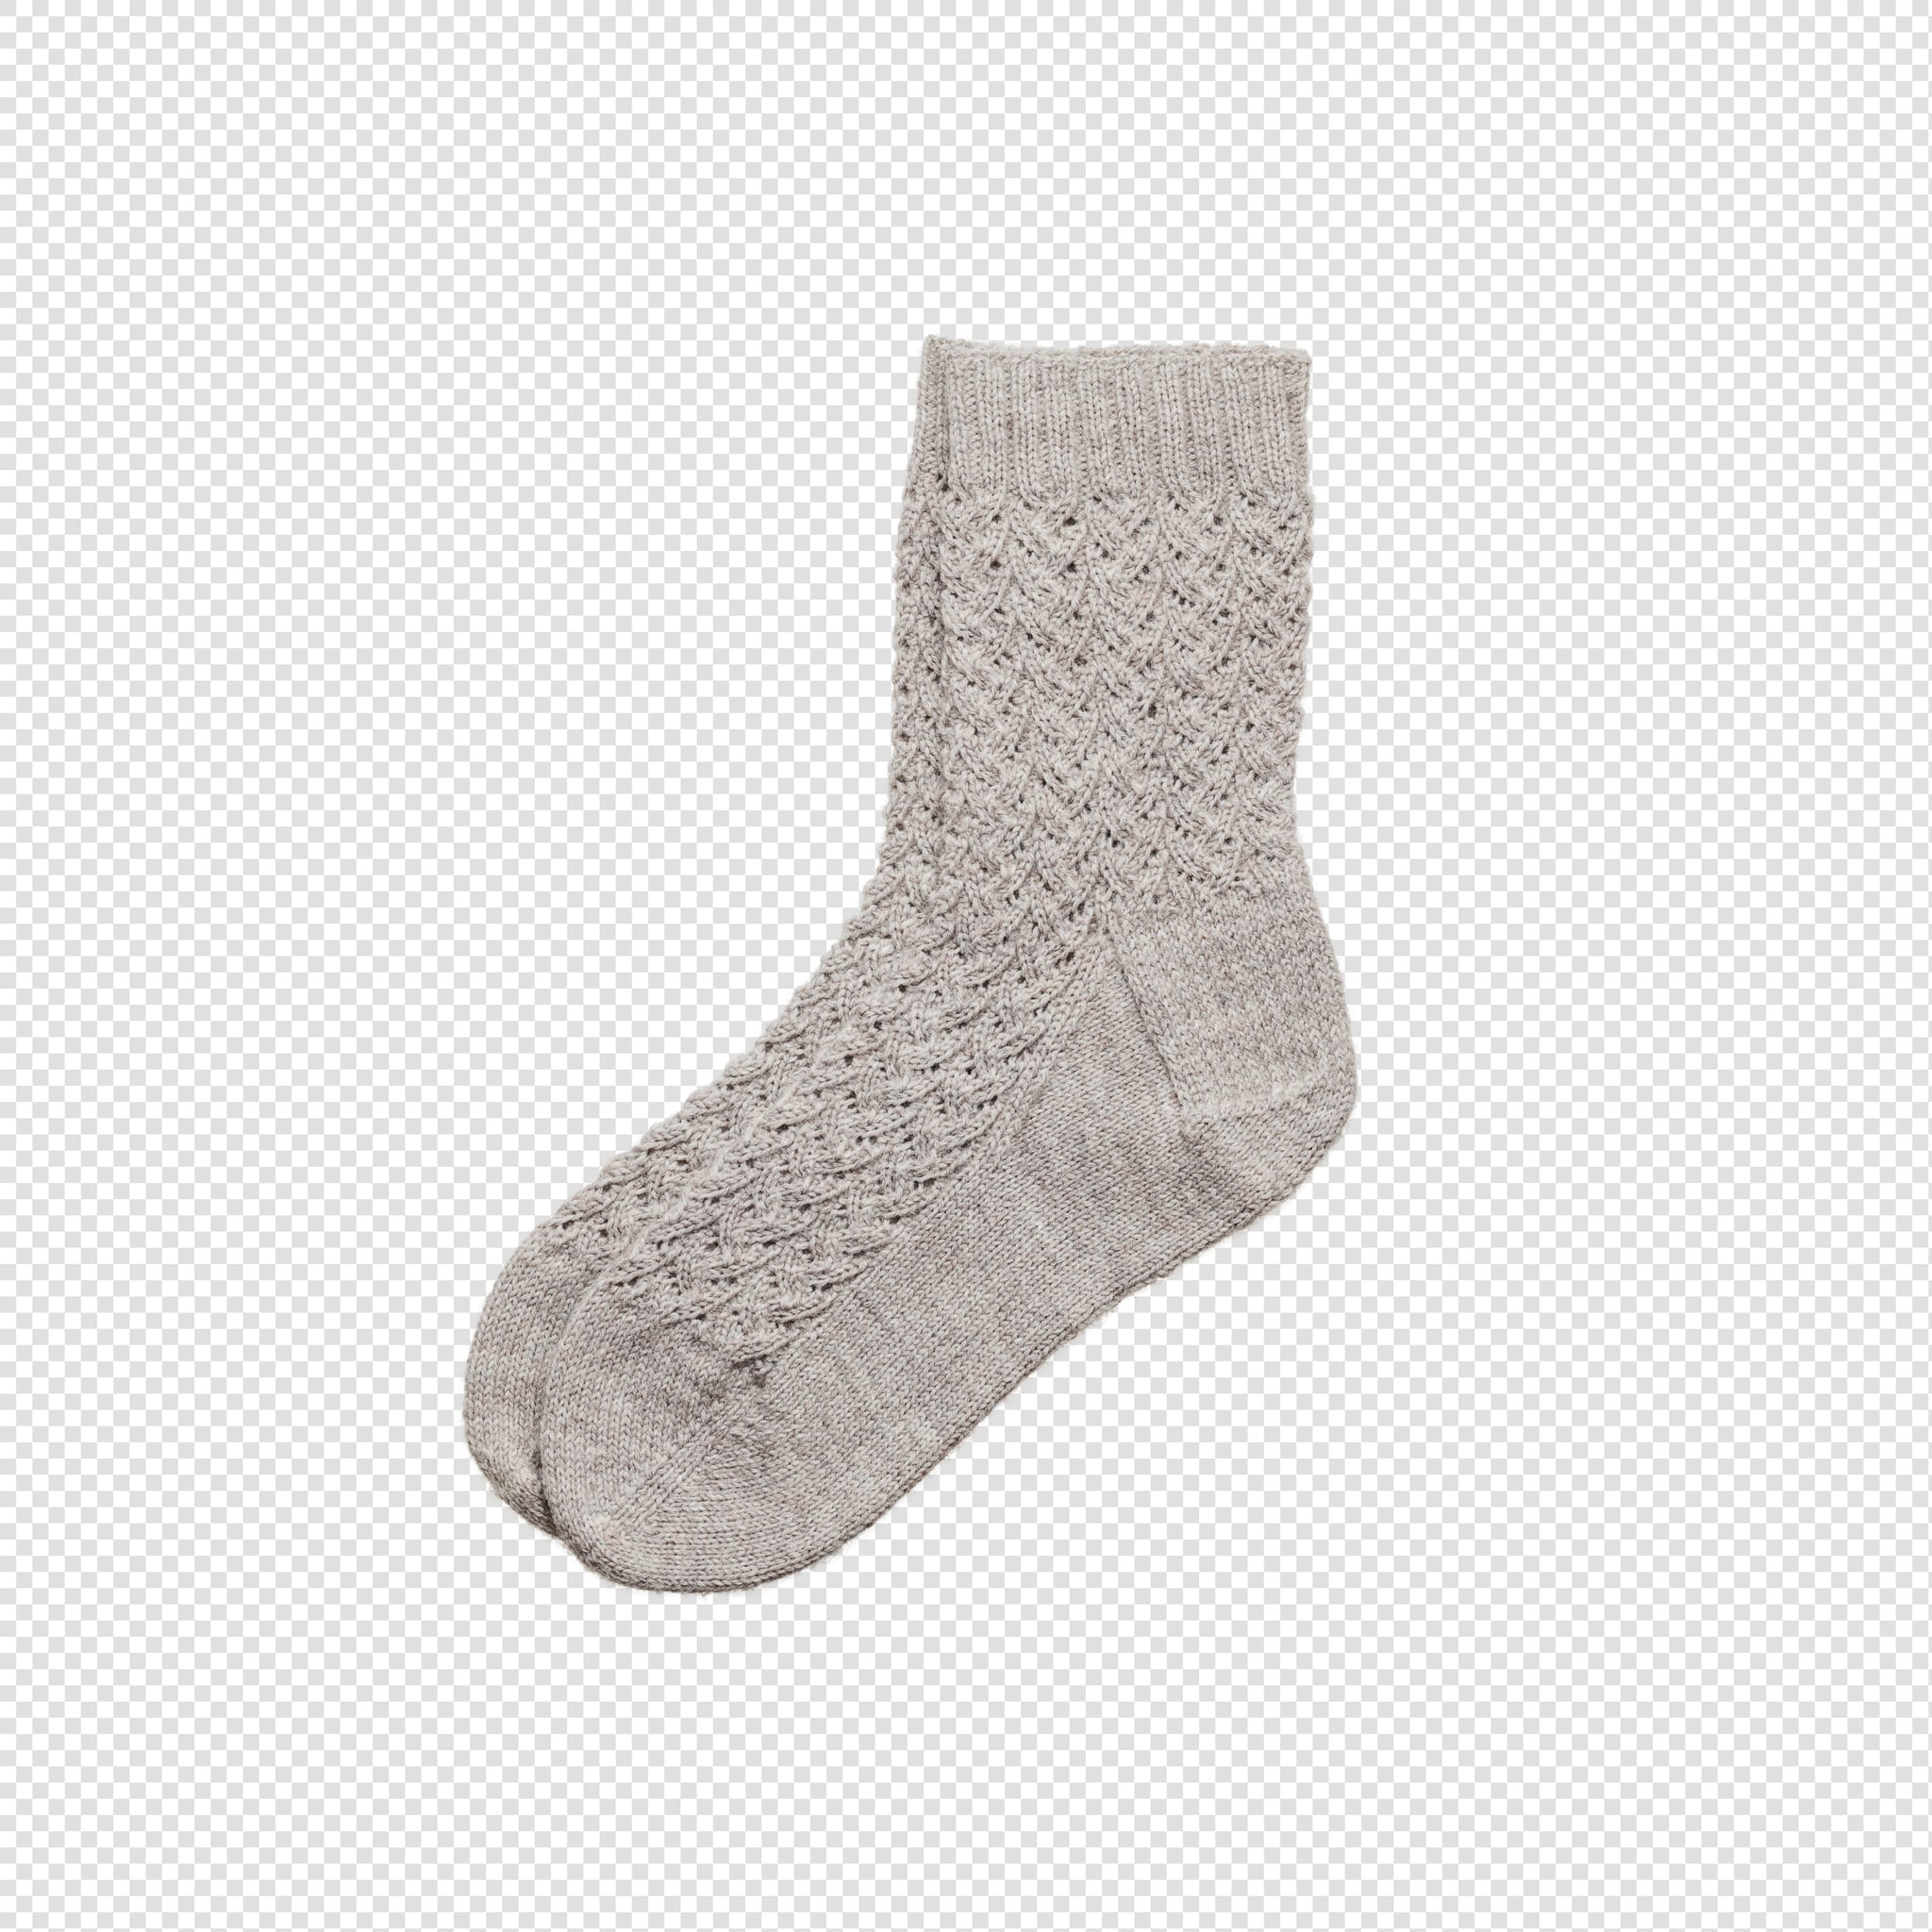 Clean Isolated PSD image of Wool socks on transparent background with separated shadow